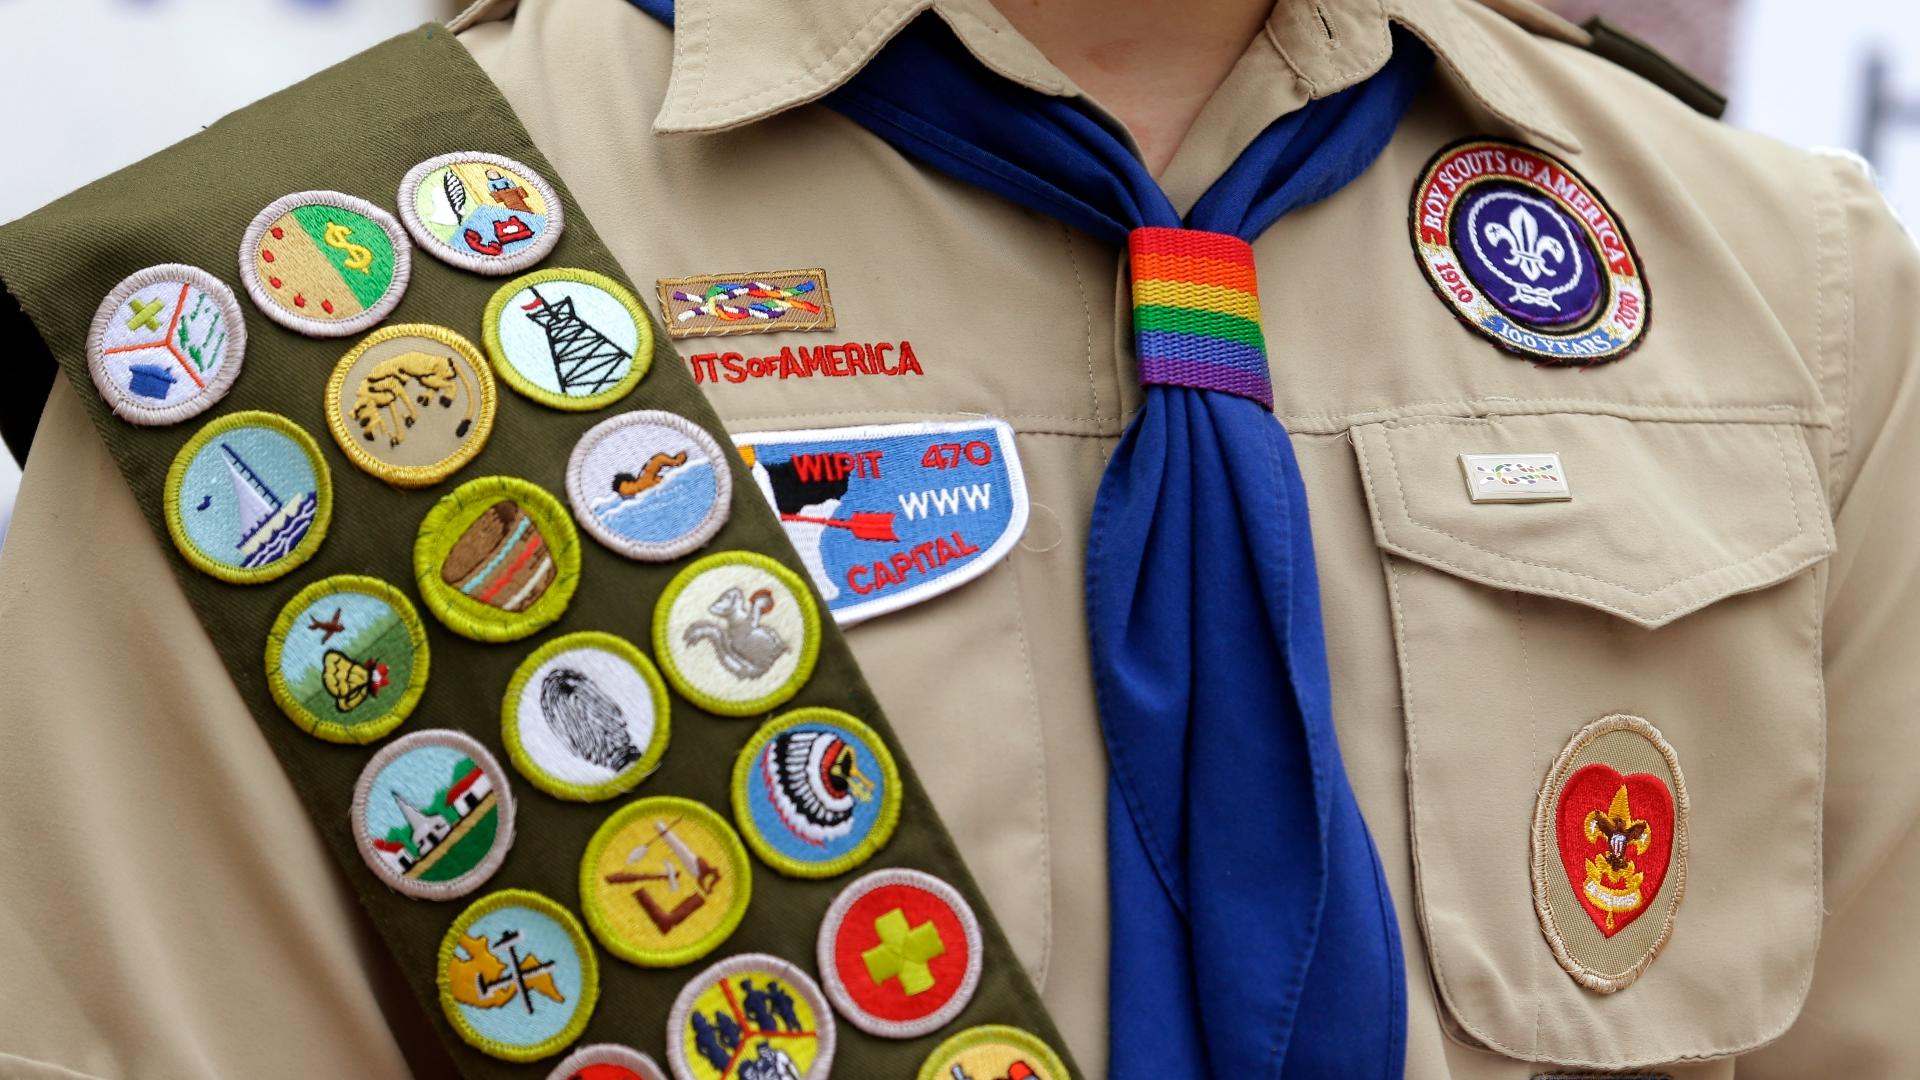 The Boy Scouts of America will becoming Scouting America on Feb. 8, 2025.